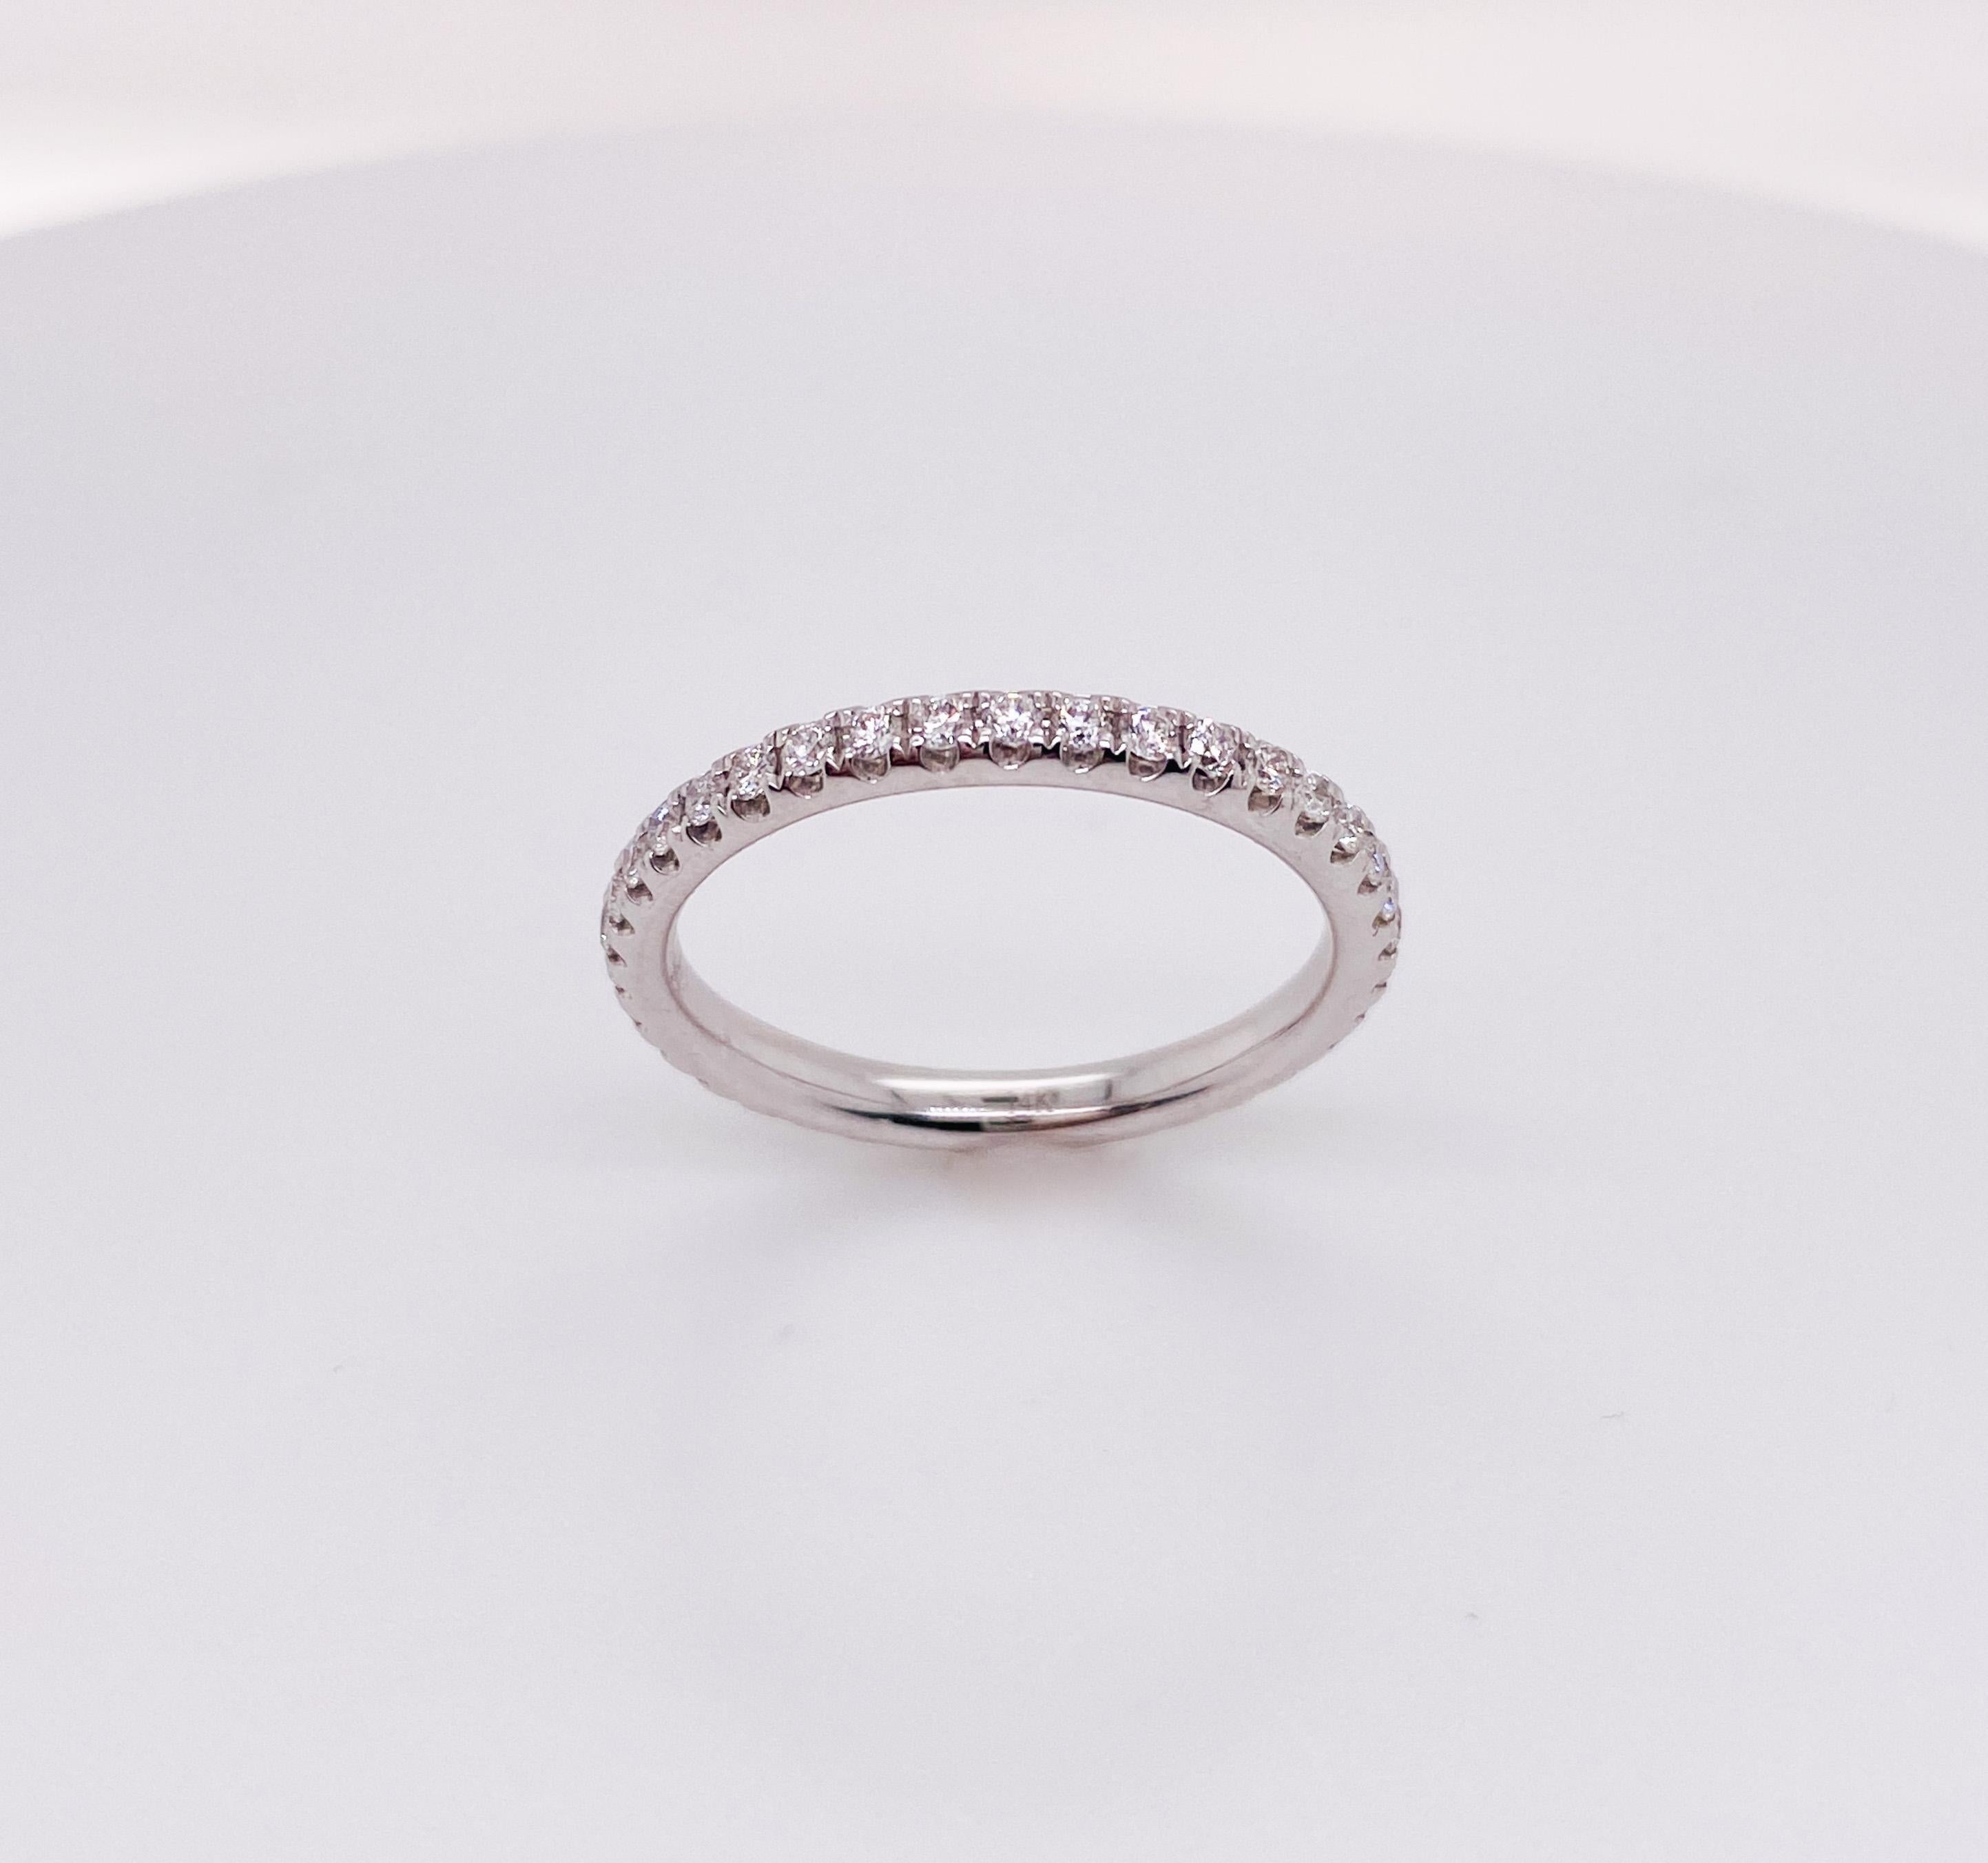 Contemporary Diamond Eternity Ring Stackable Band 0.55 Carat 14k White Gold, Low Profile For Sale